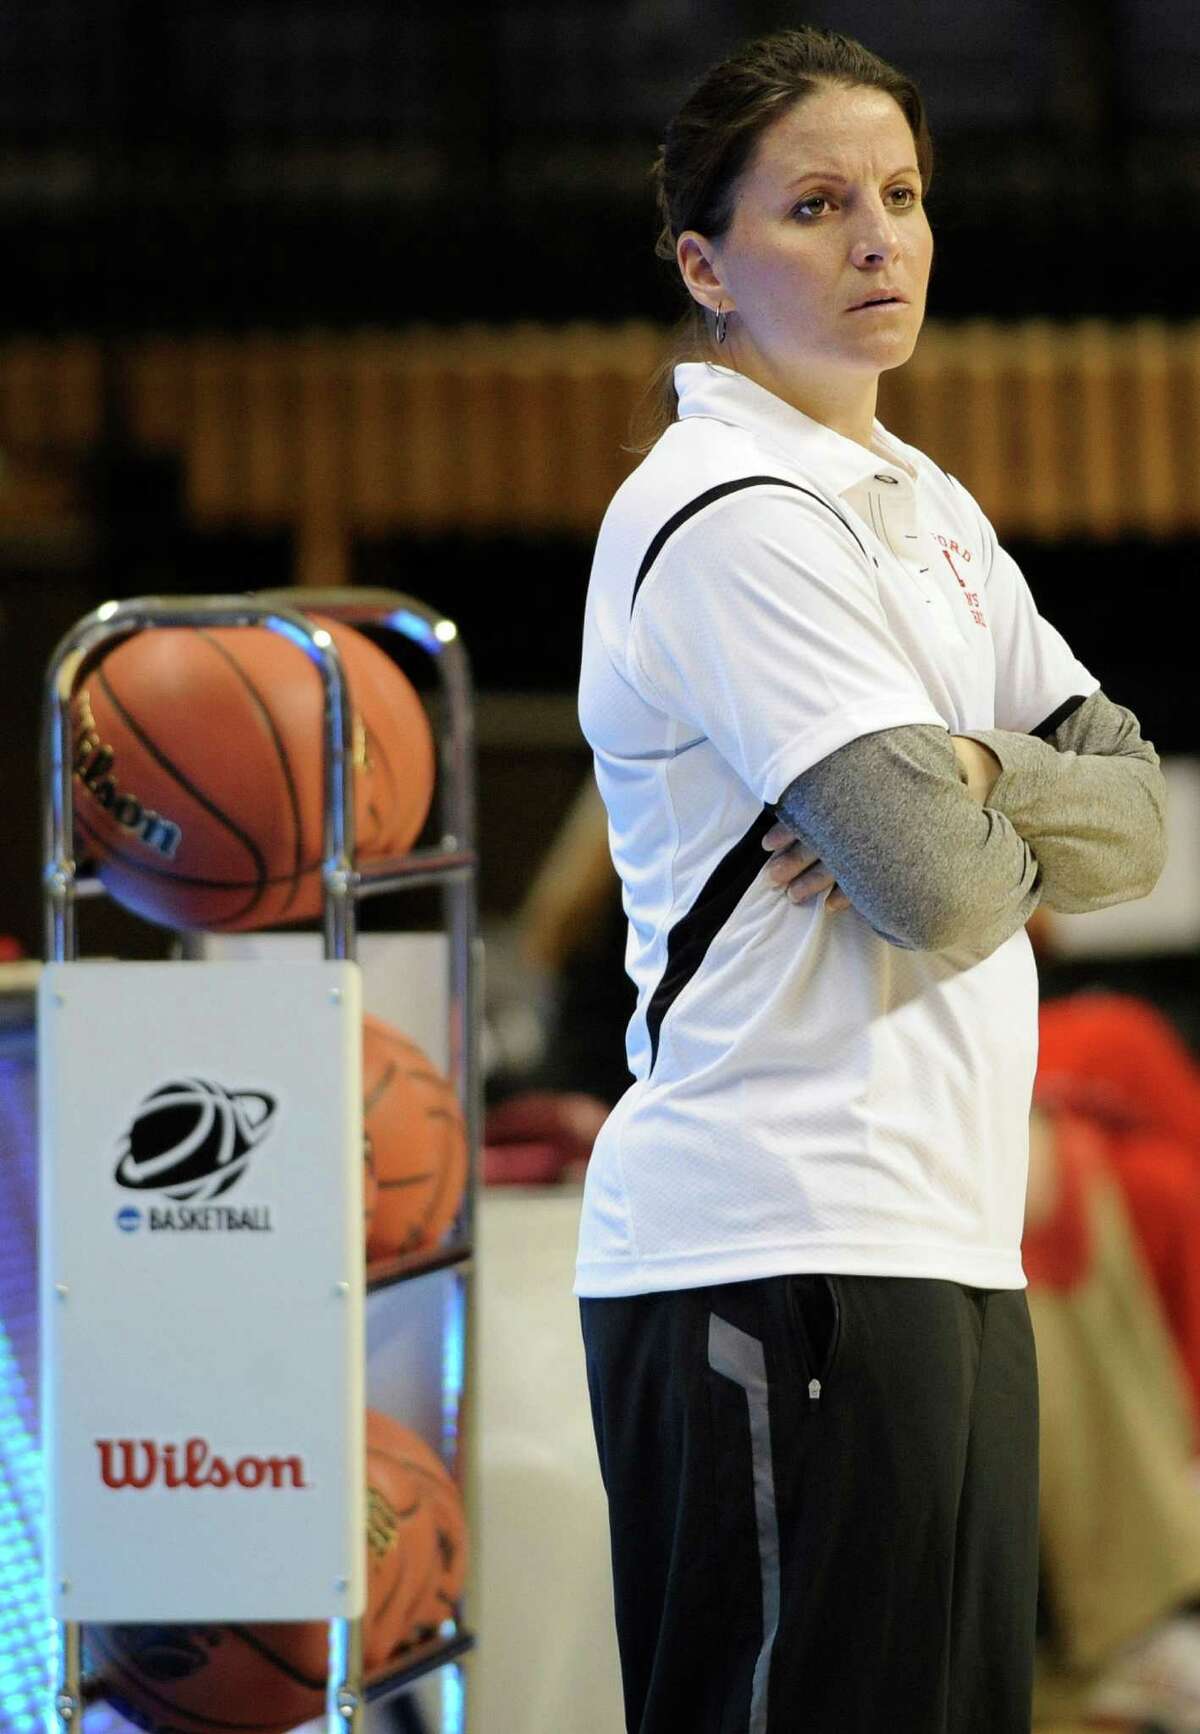 Hartford head coach Jennifer Rizzotti watches her team practice in the first round of the NCAA women's college basketball tournament Storrs, Conn., Saturday, March 19, 2011. Hartford plays Connecticut on Sunday. (AP Photo/Jessica Hill)